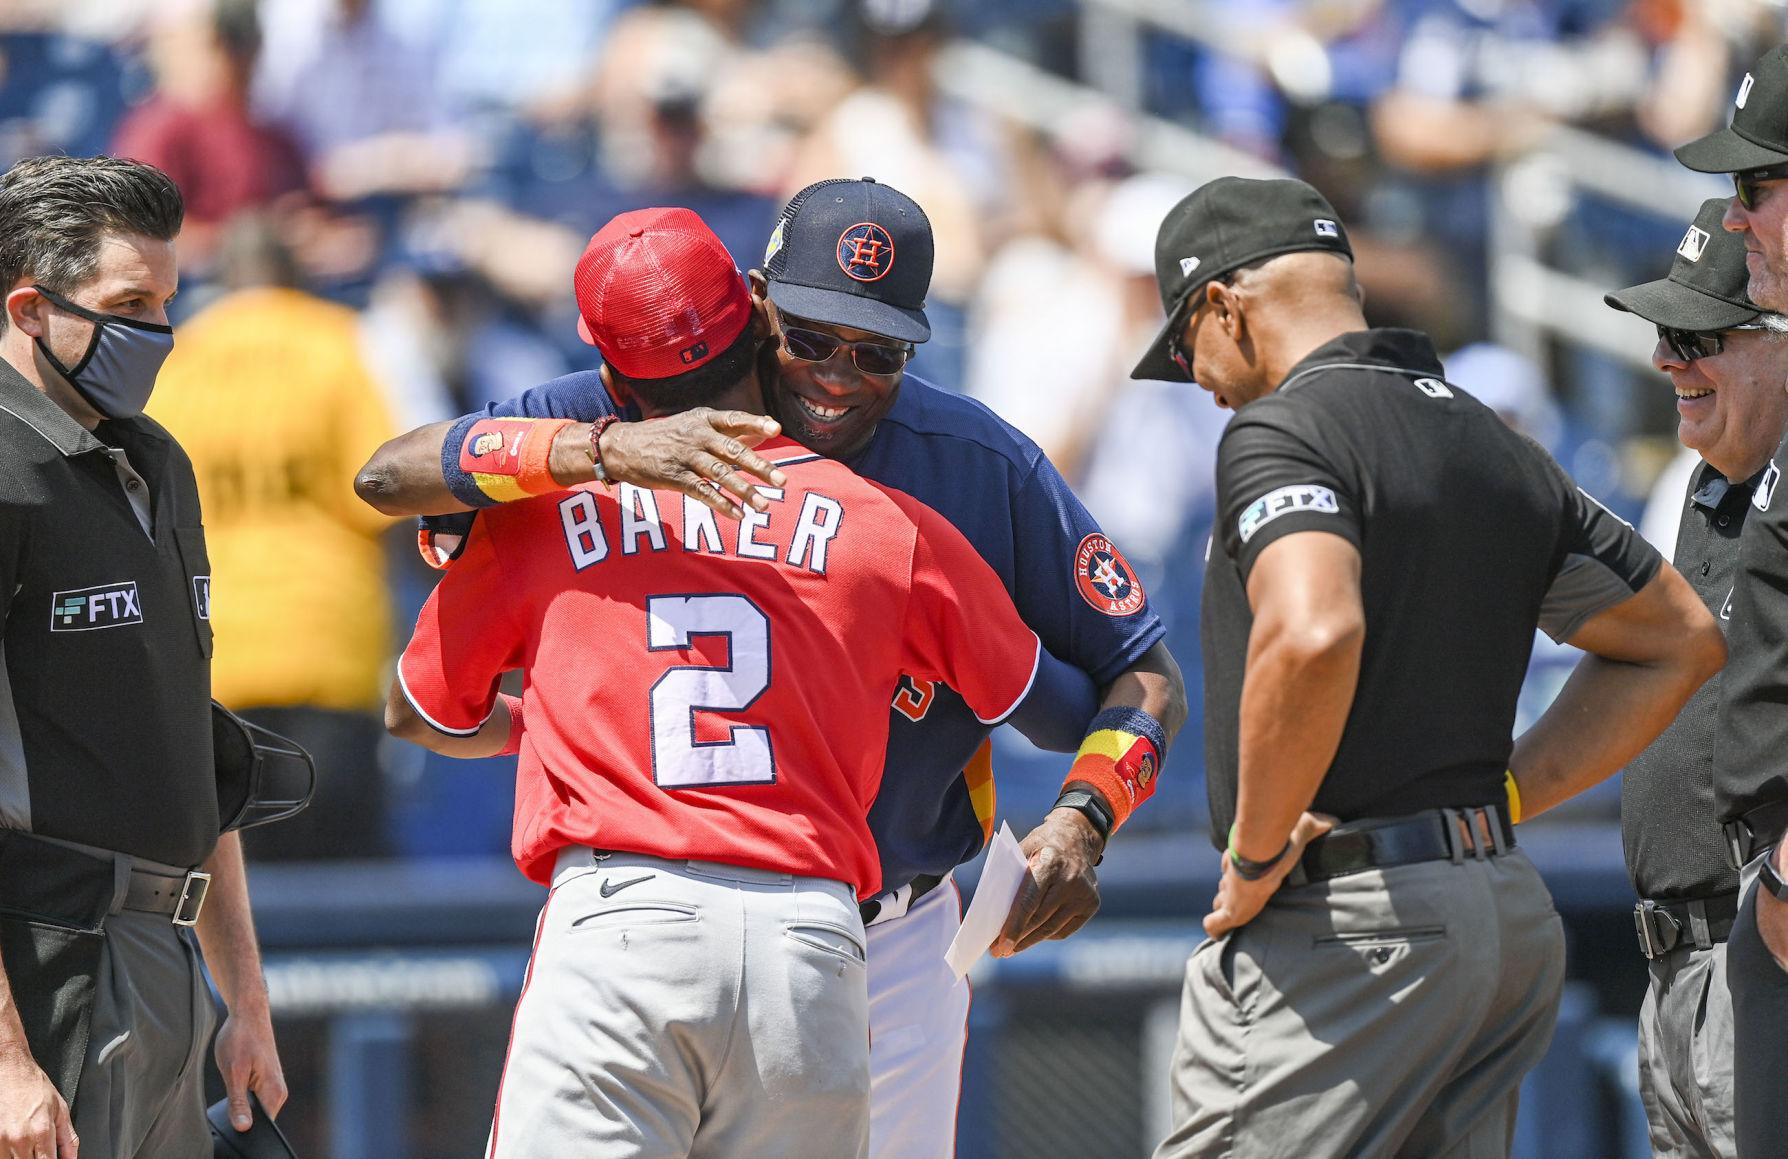 Dusty Baker on winning three of four in Braves series, Nationals